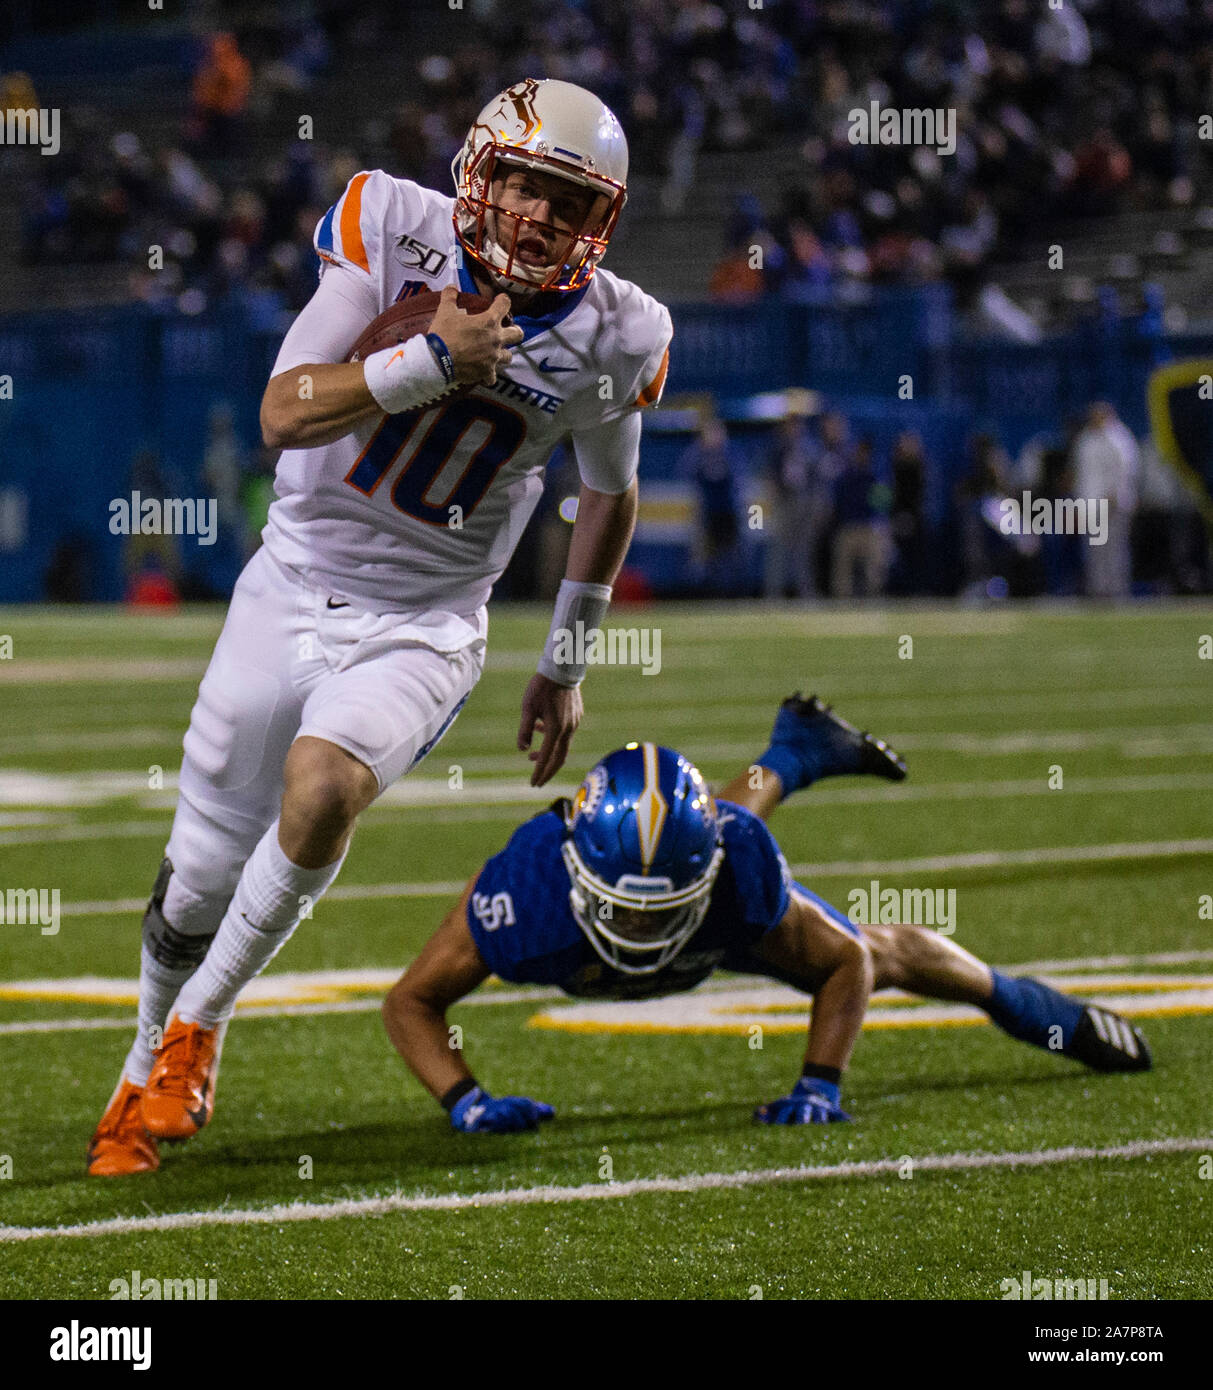 CEFCU Stadium San Jose, CA. 02nd Nov, 2019. San Jose, CA Boise State quarterback Chase Cord (10) runs with the ball and scored a touchdown during the NCAA Football game between Boise State Broncos and the San Jose State Spartans 52-42 win at CEFCU Stadium San Jose, CA. Thurman James/CSM/Alamy Live News Stock Photo